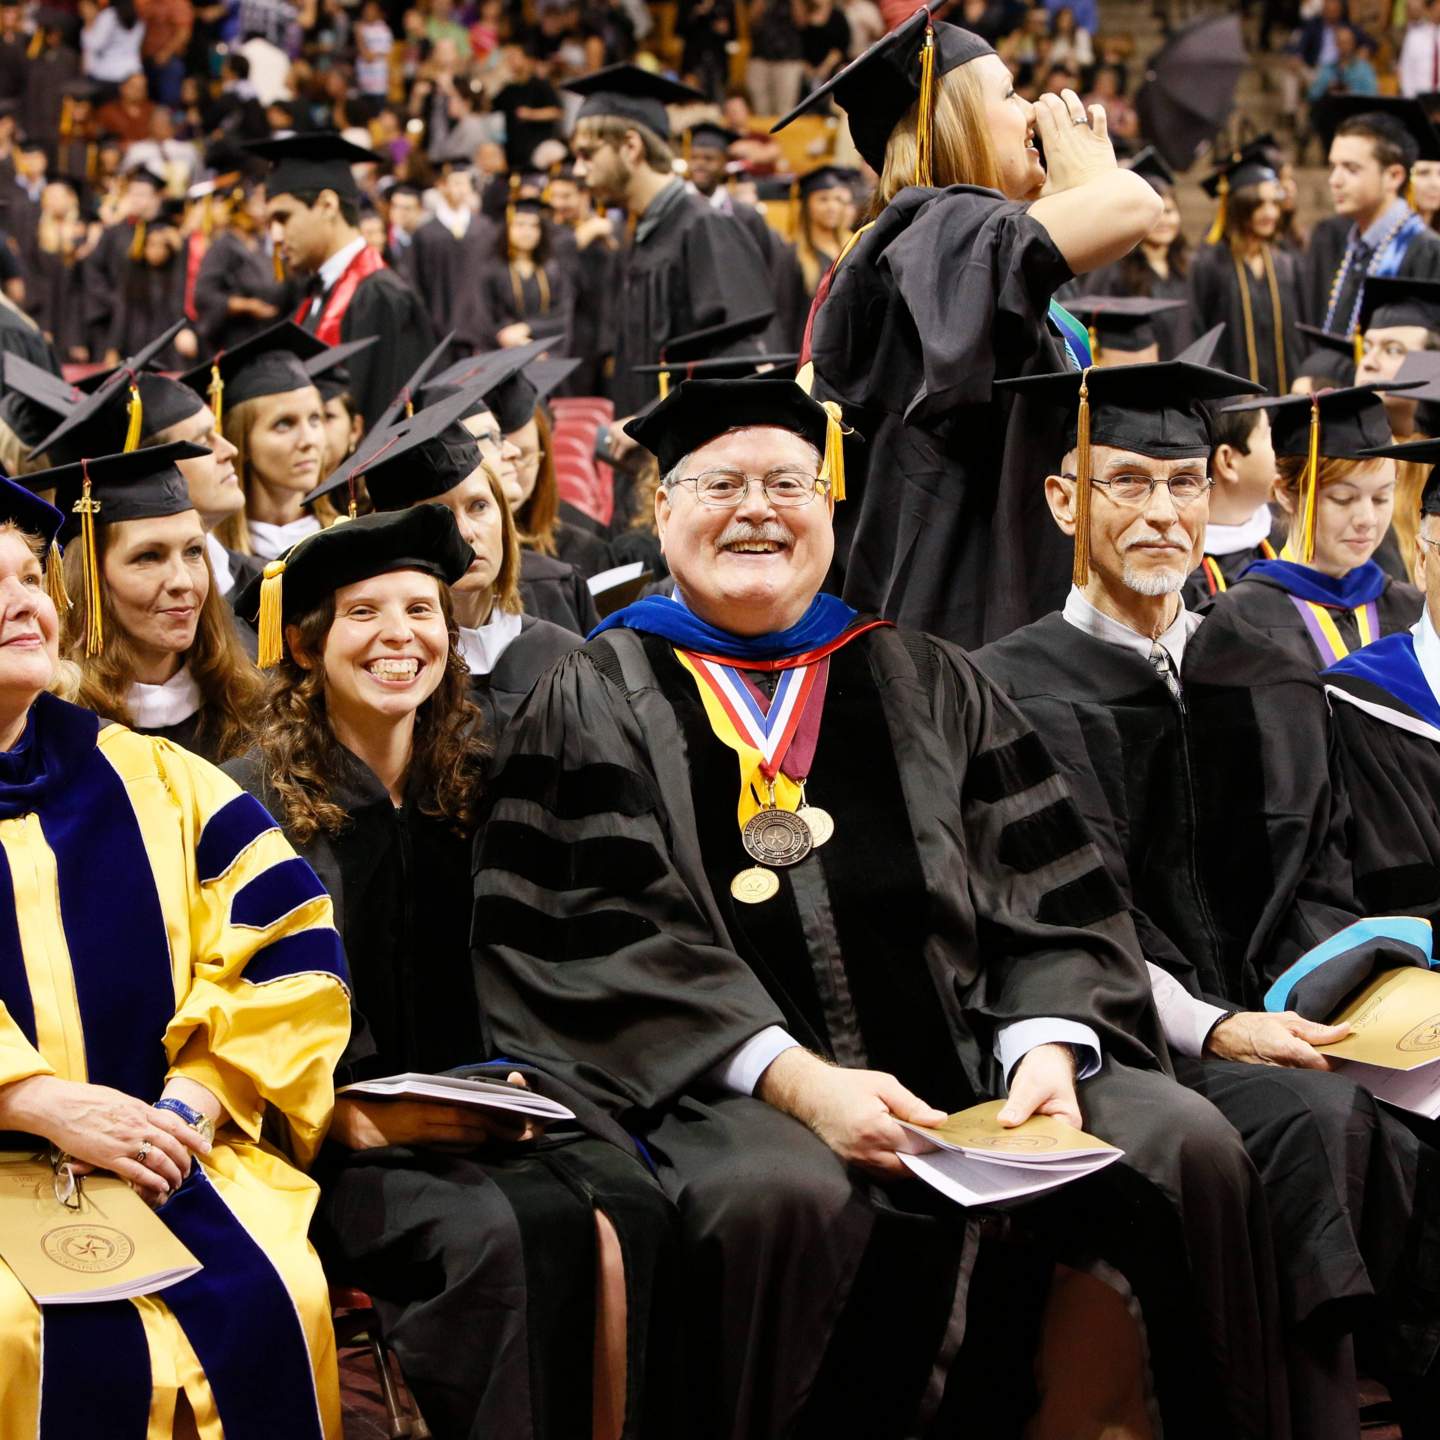 Excited staff and graduates during commencement ceremony 